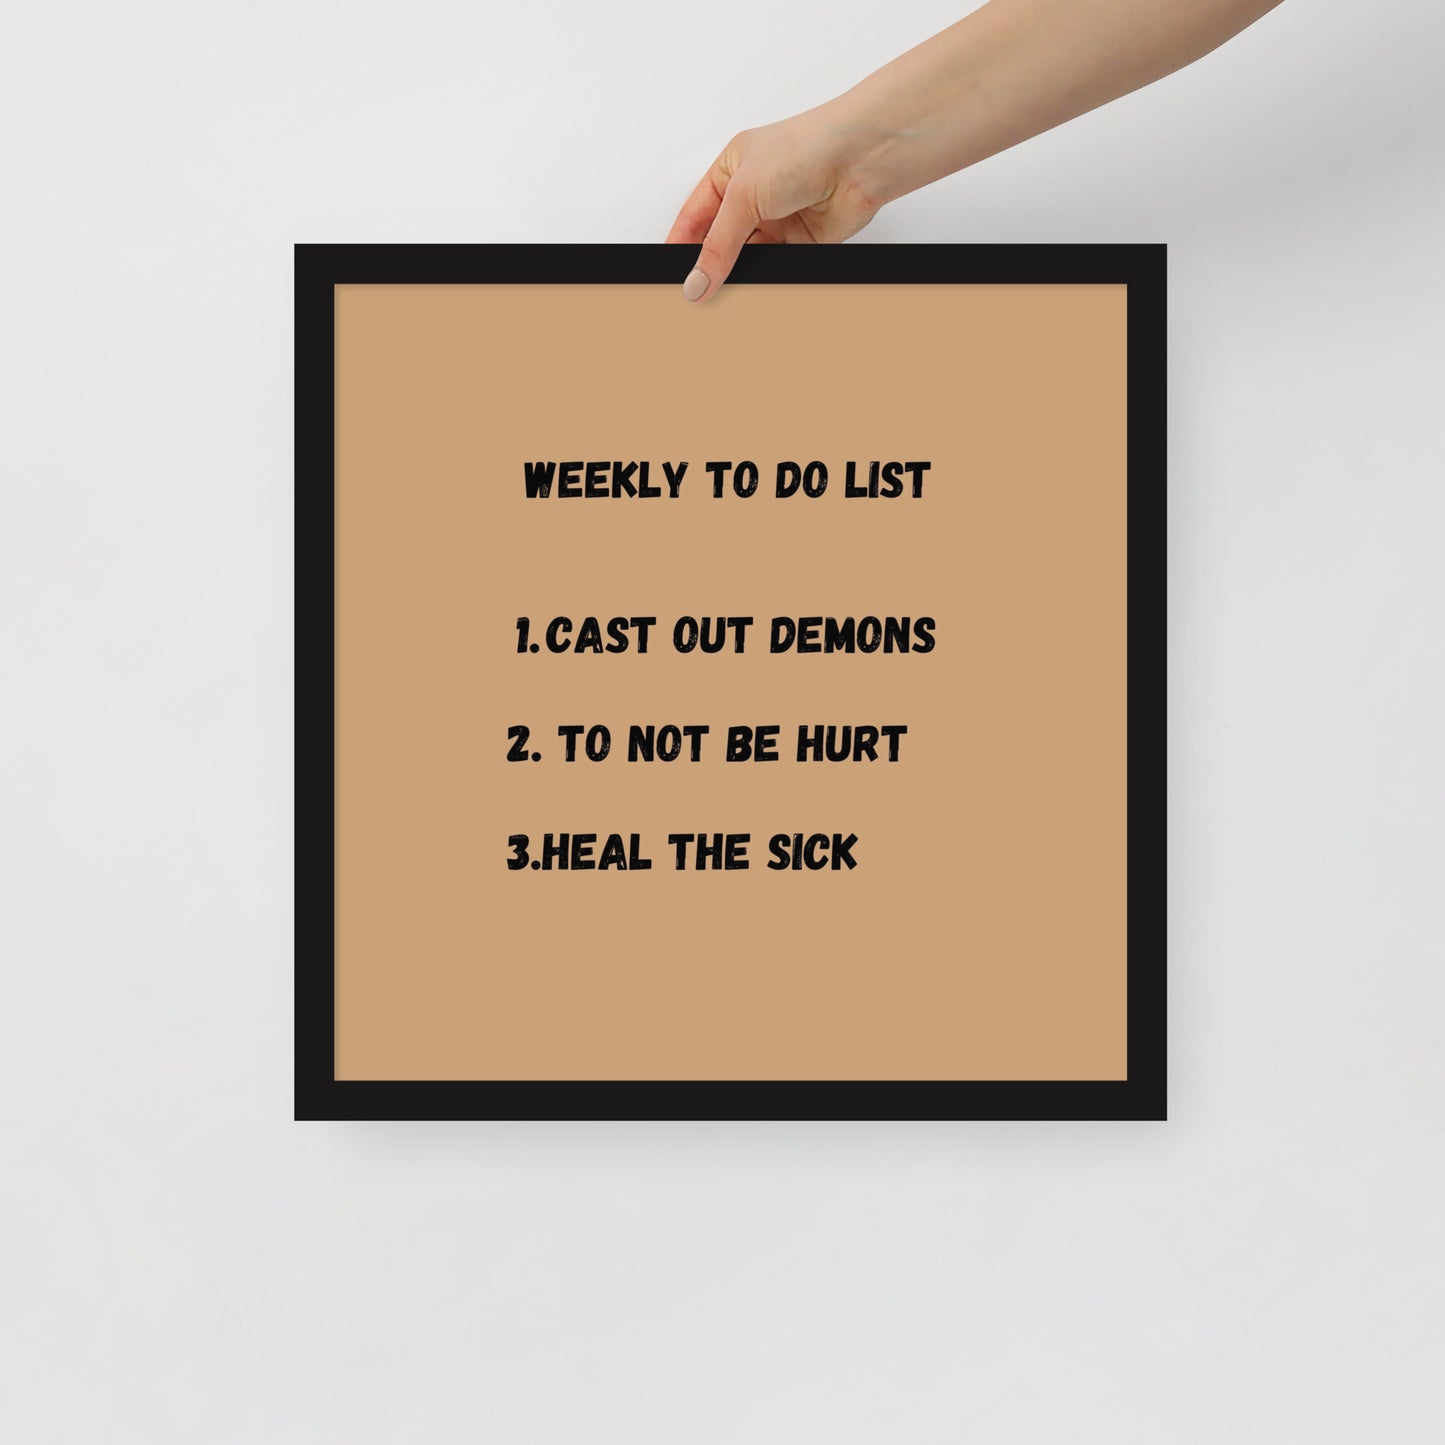 Framed poster - Weekly to do list